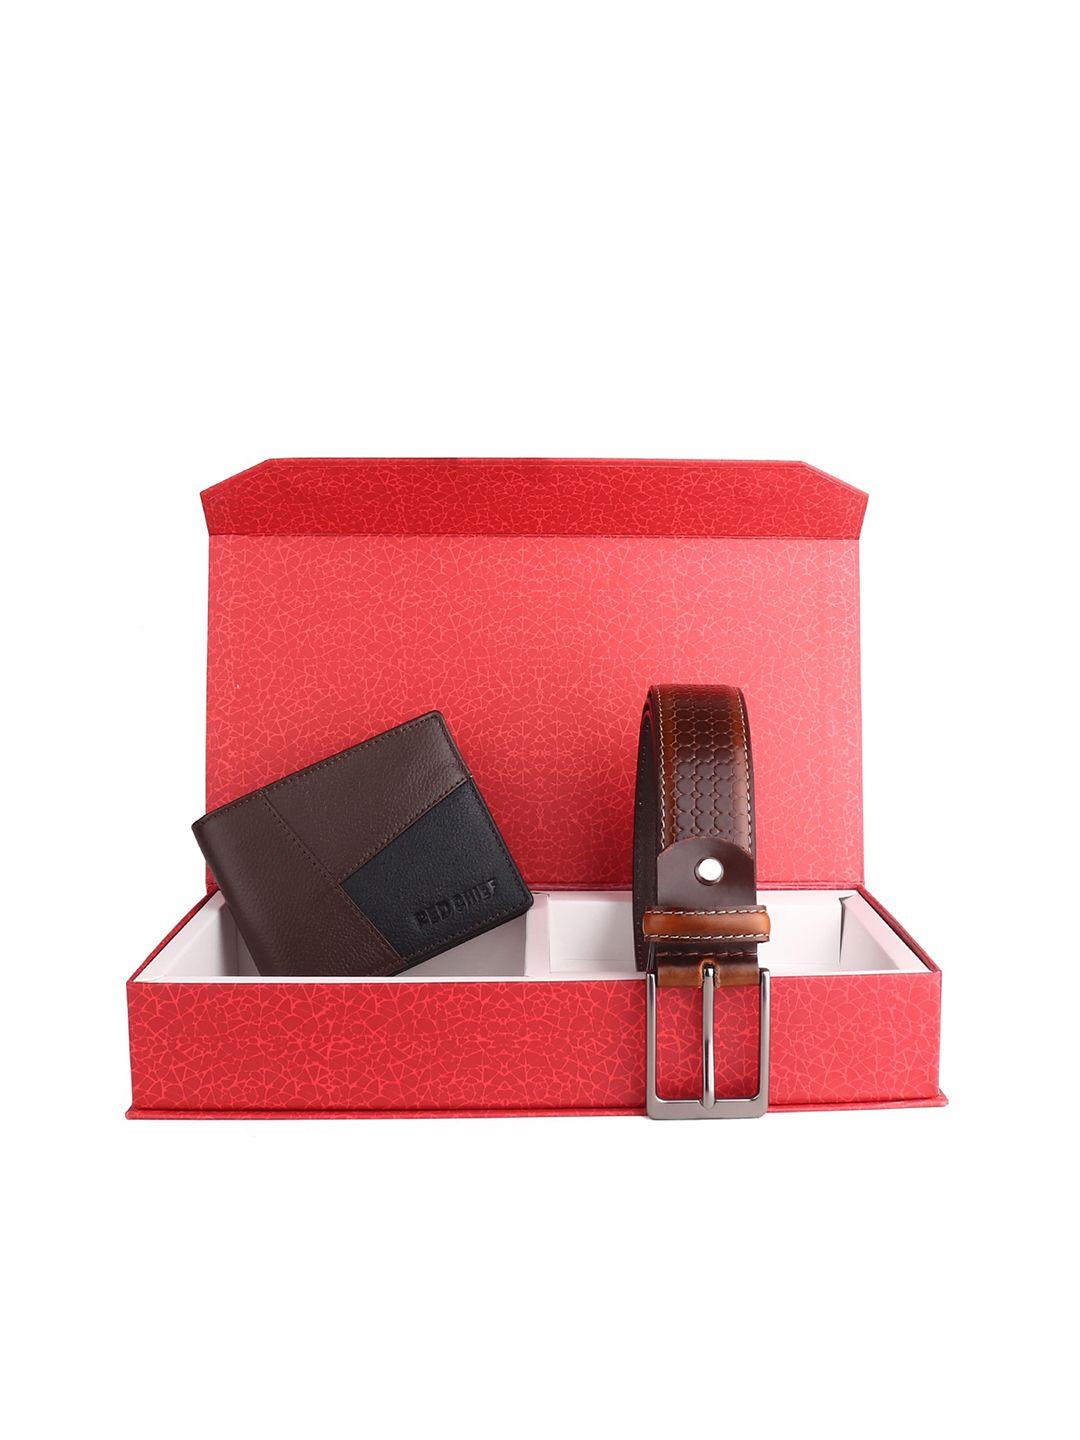 red-chief-men-leather-accessory-gift-set